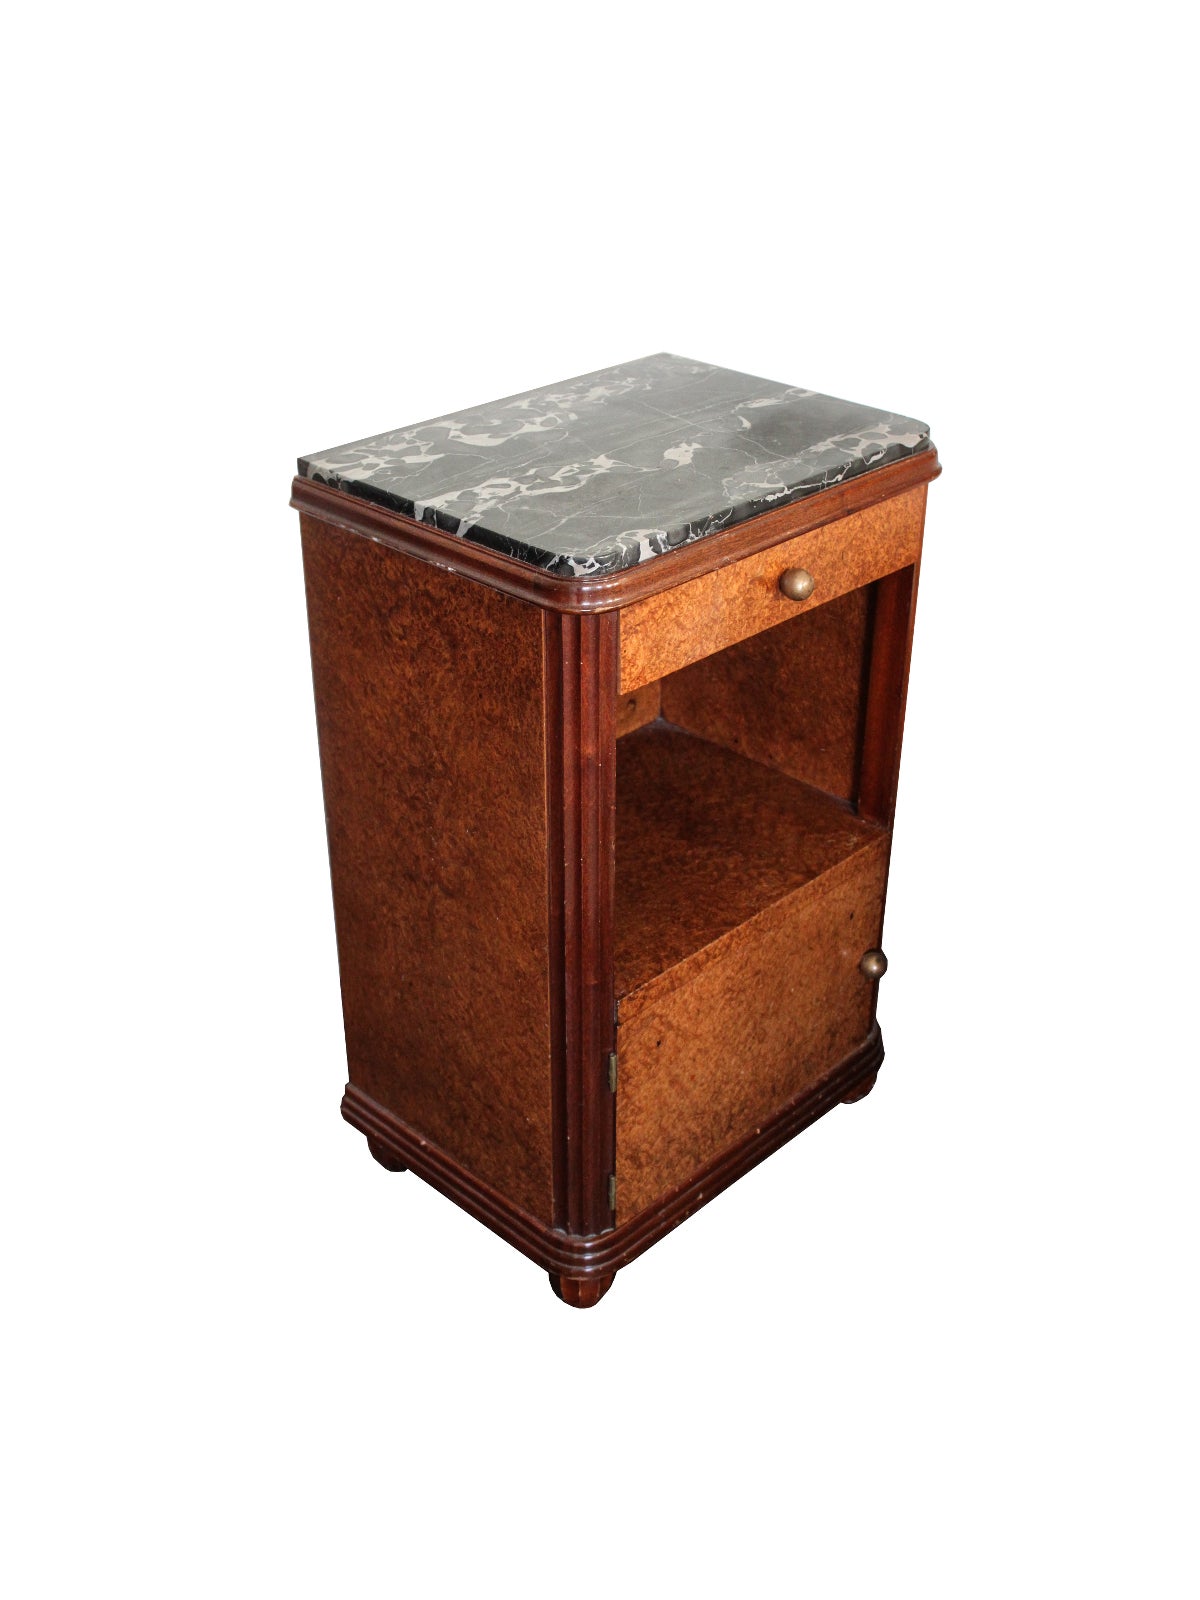 Pair of burled walnut and marble art deco side tables. One drawer and lower cabinet with original brass hardware and finish. The perfect height to use as a nightstand. Good overall condition with minor wear consistent with age and use. 

